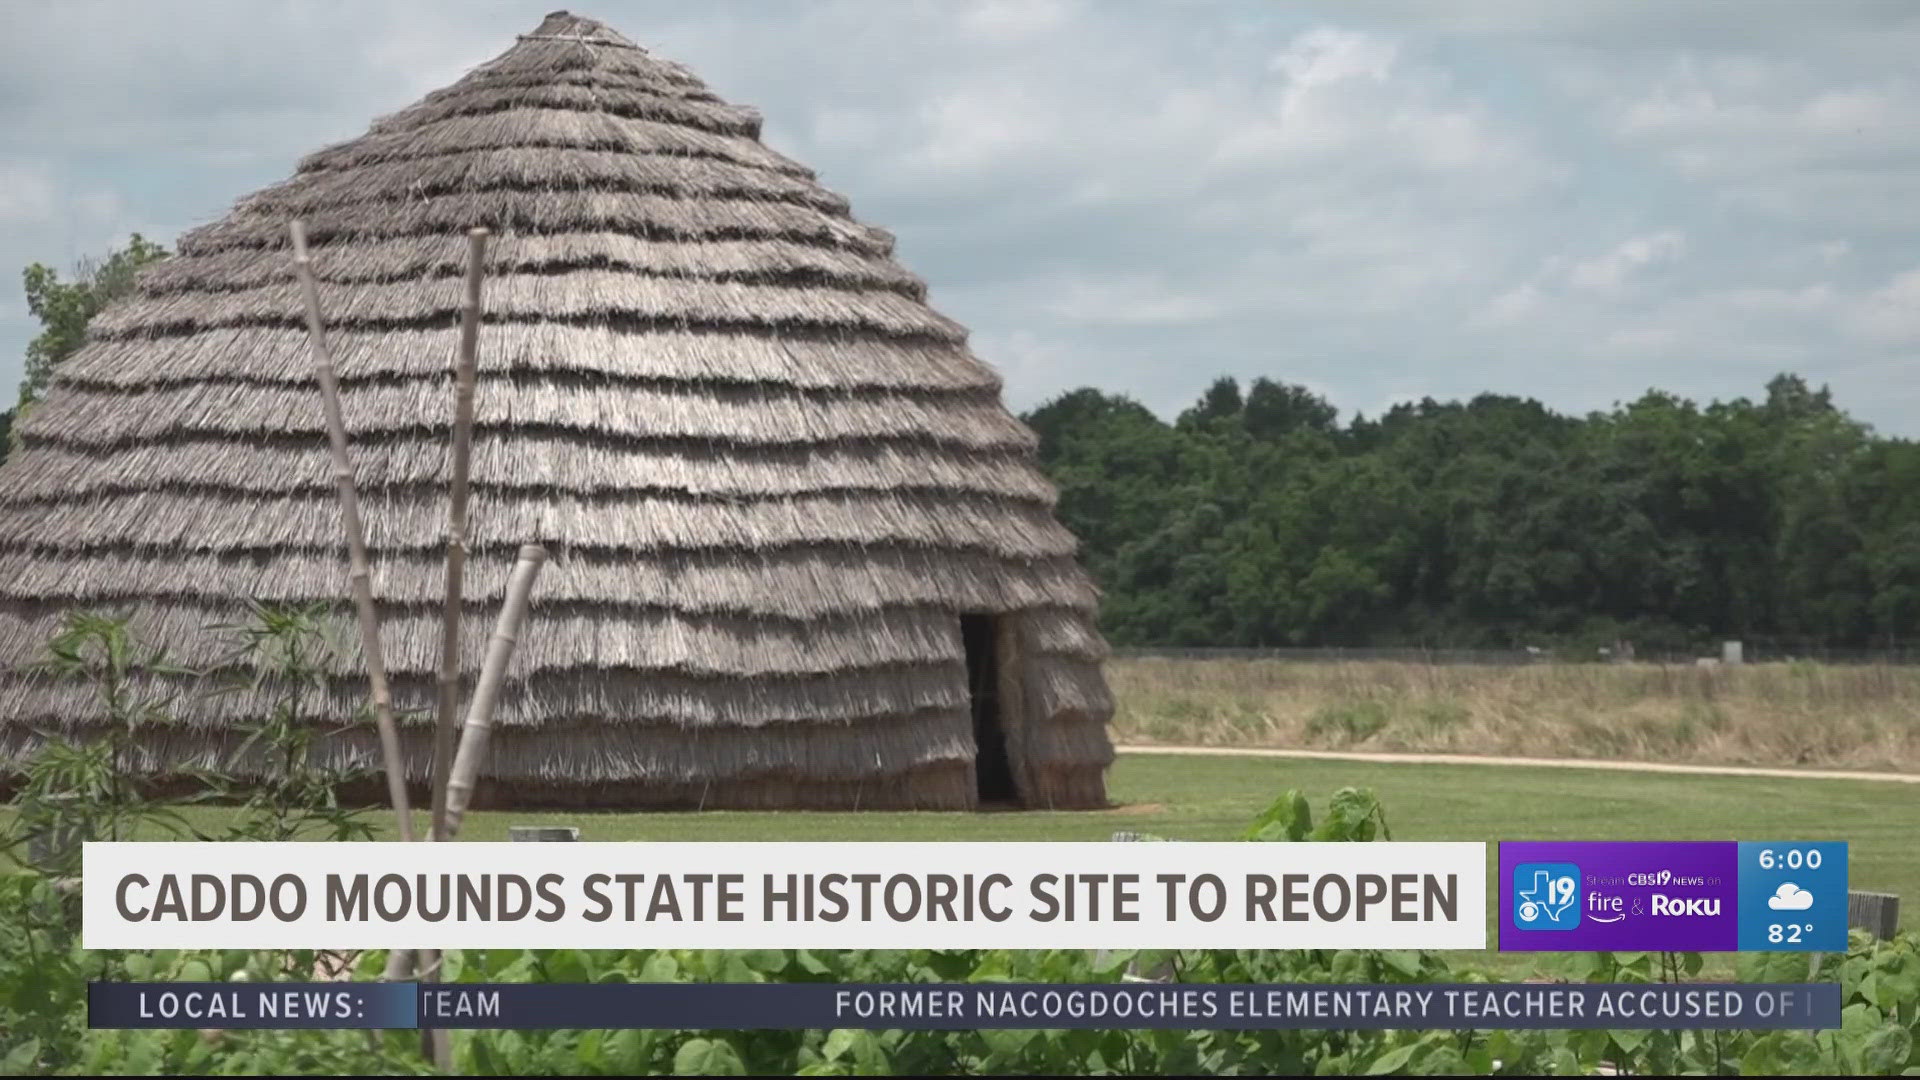 In April 2019, an EF-3 tornado ripped through the city of Alto and hit the area of Caddo Mounds during Caddo Culture Day.